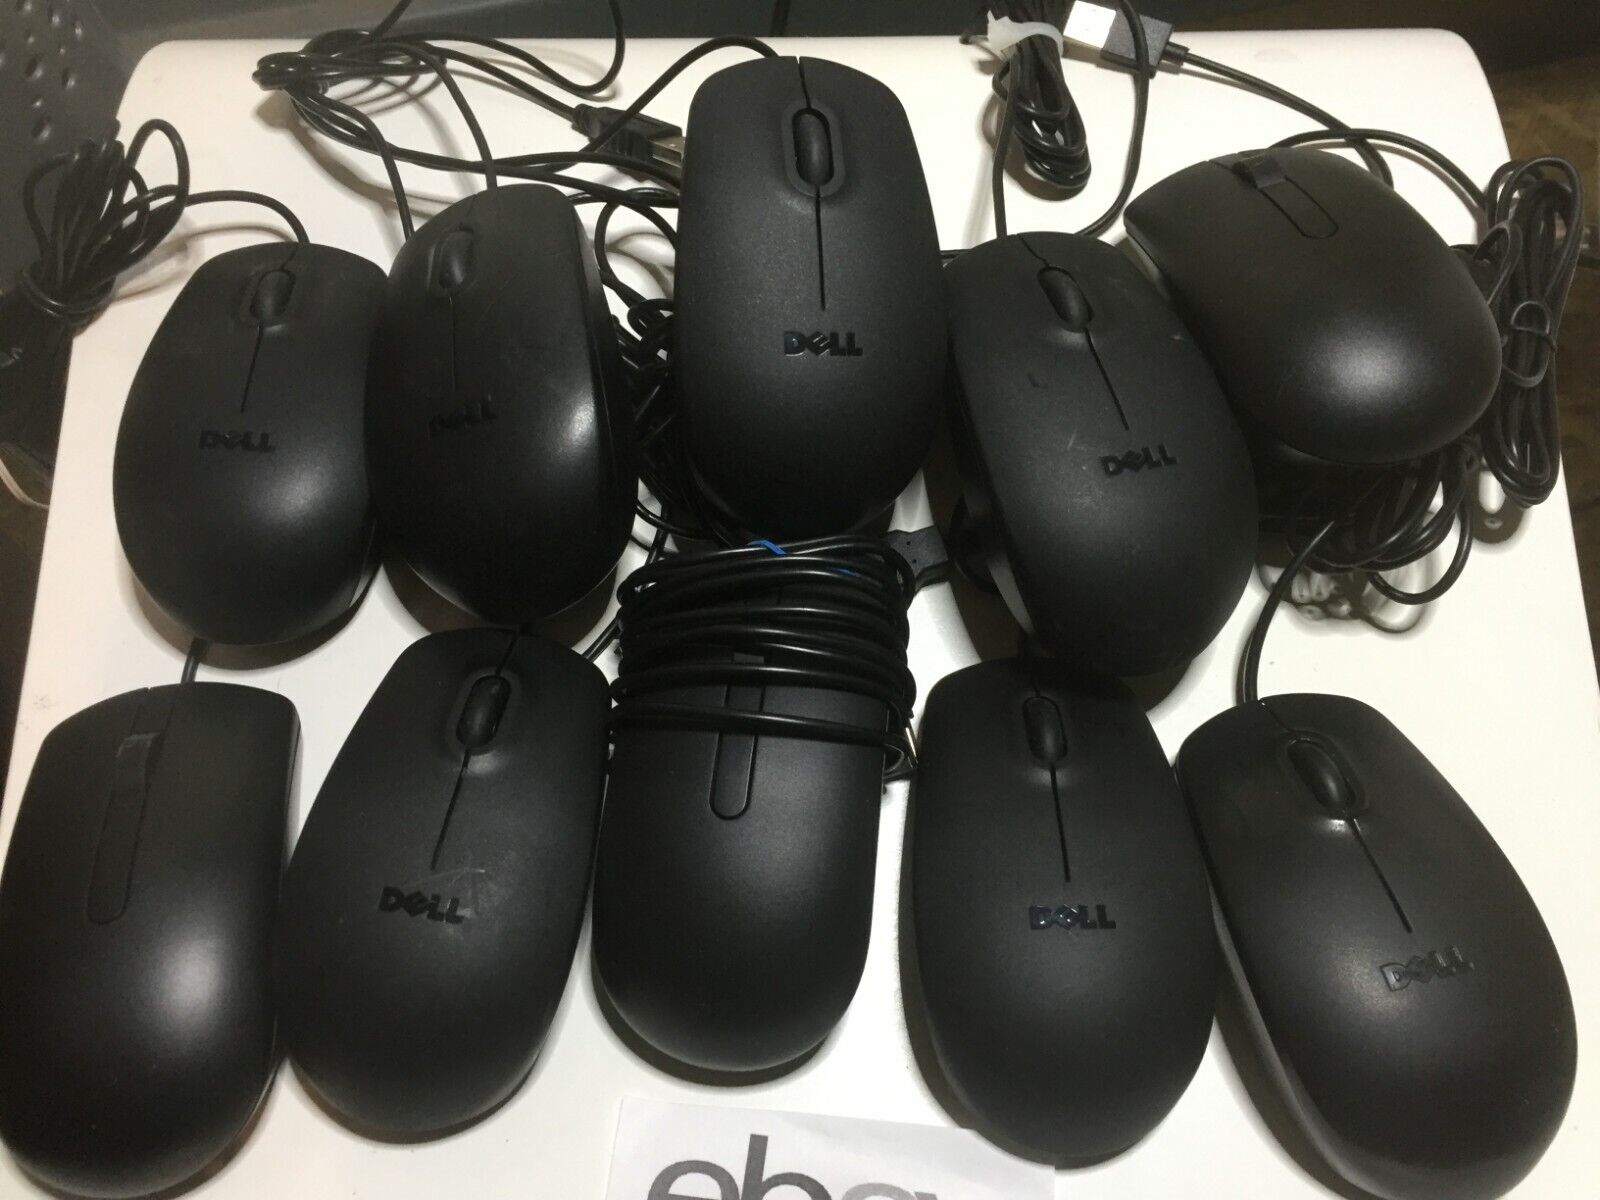 Lot of 10 Dell Black USB Optical Mouse w/ Scroll Wheel 11D3V 5Y2RG 356WK 9RRC7  Dell MS111-P 5Y2RG 11D3V RGR5X KW2YH